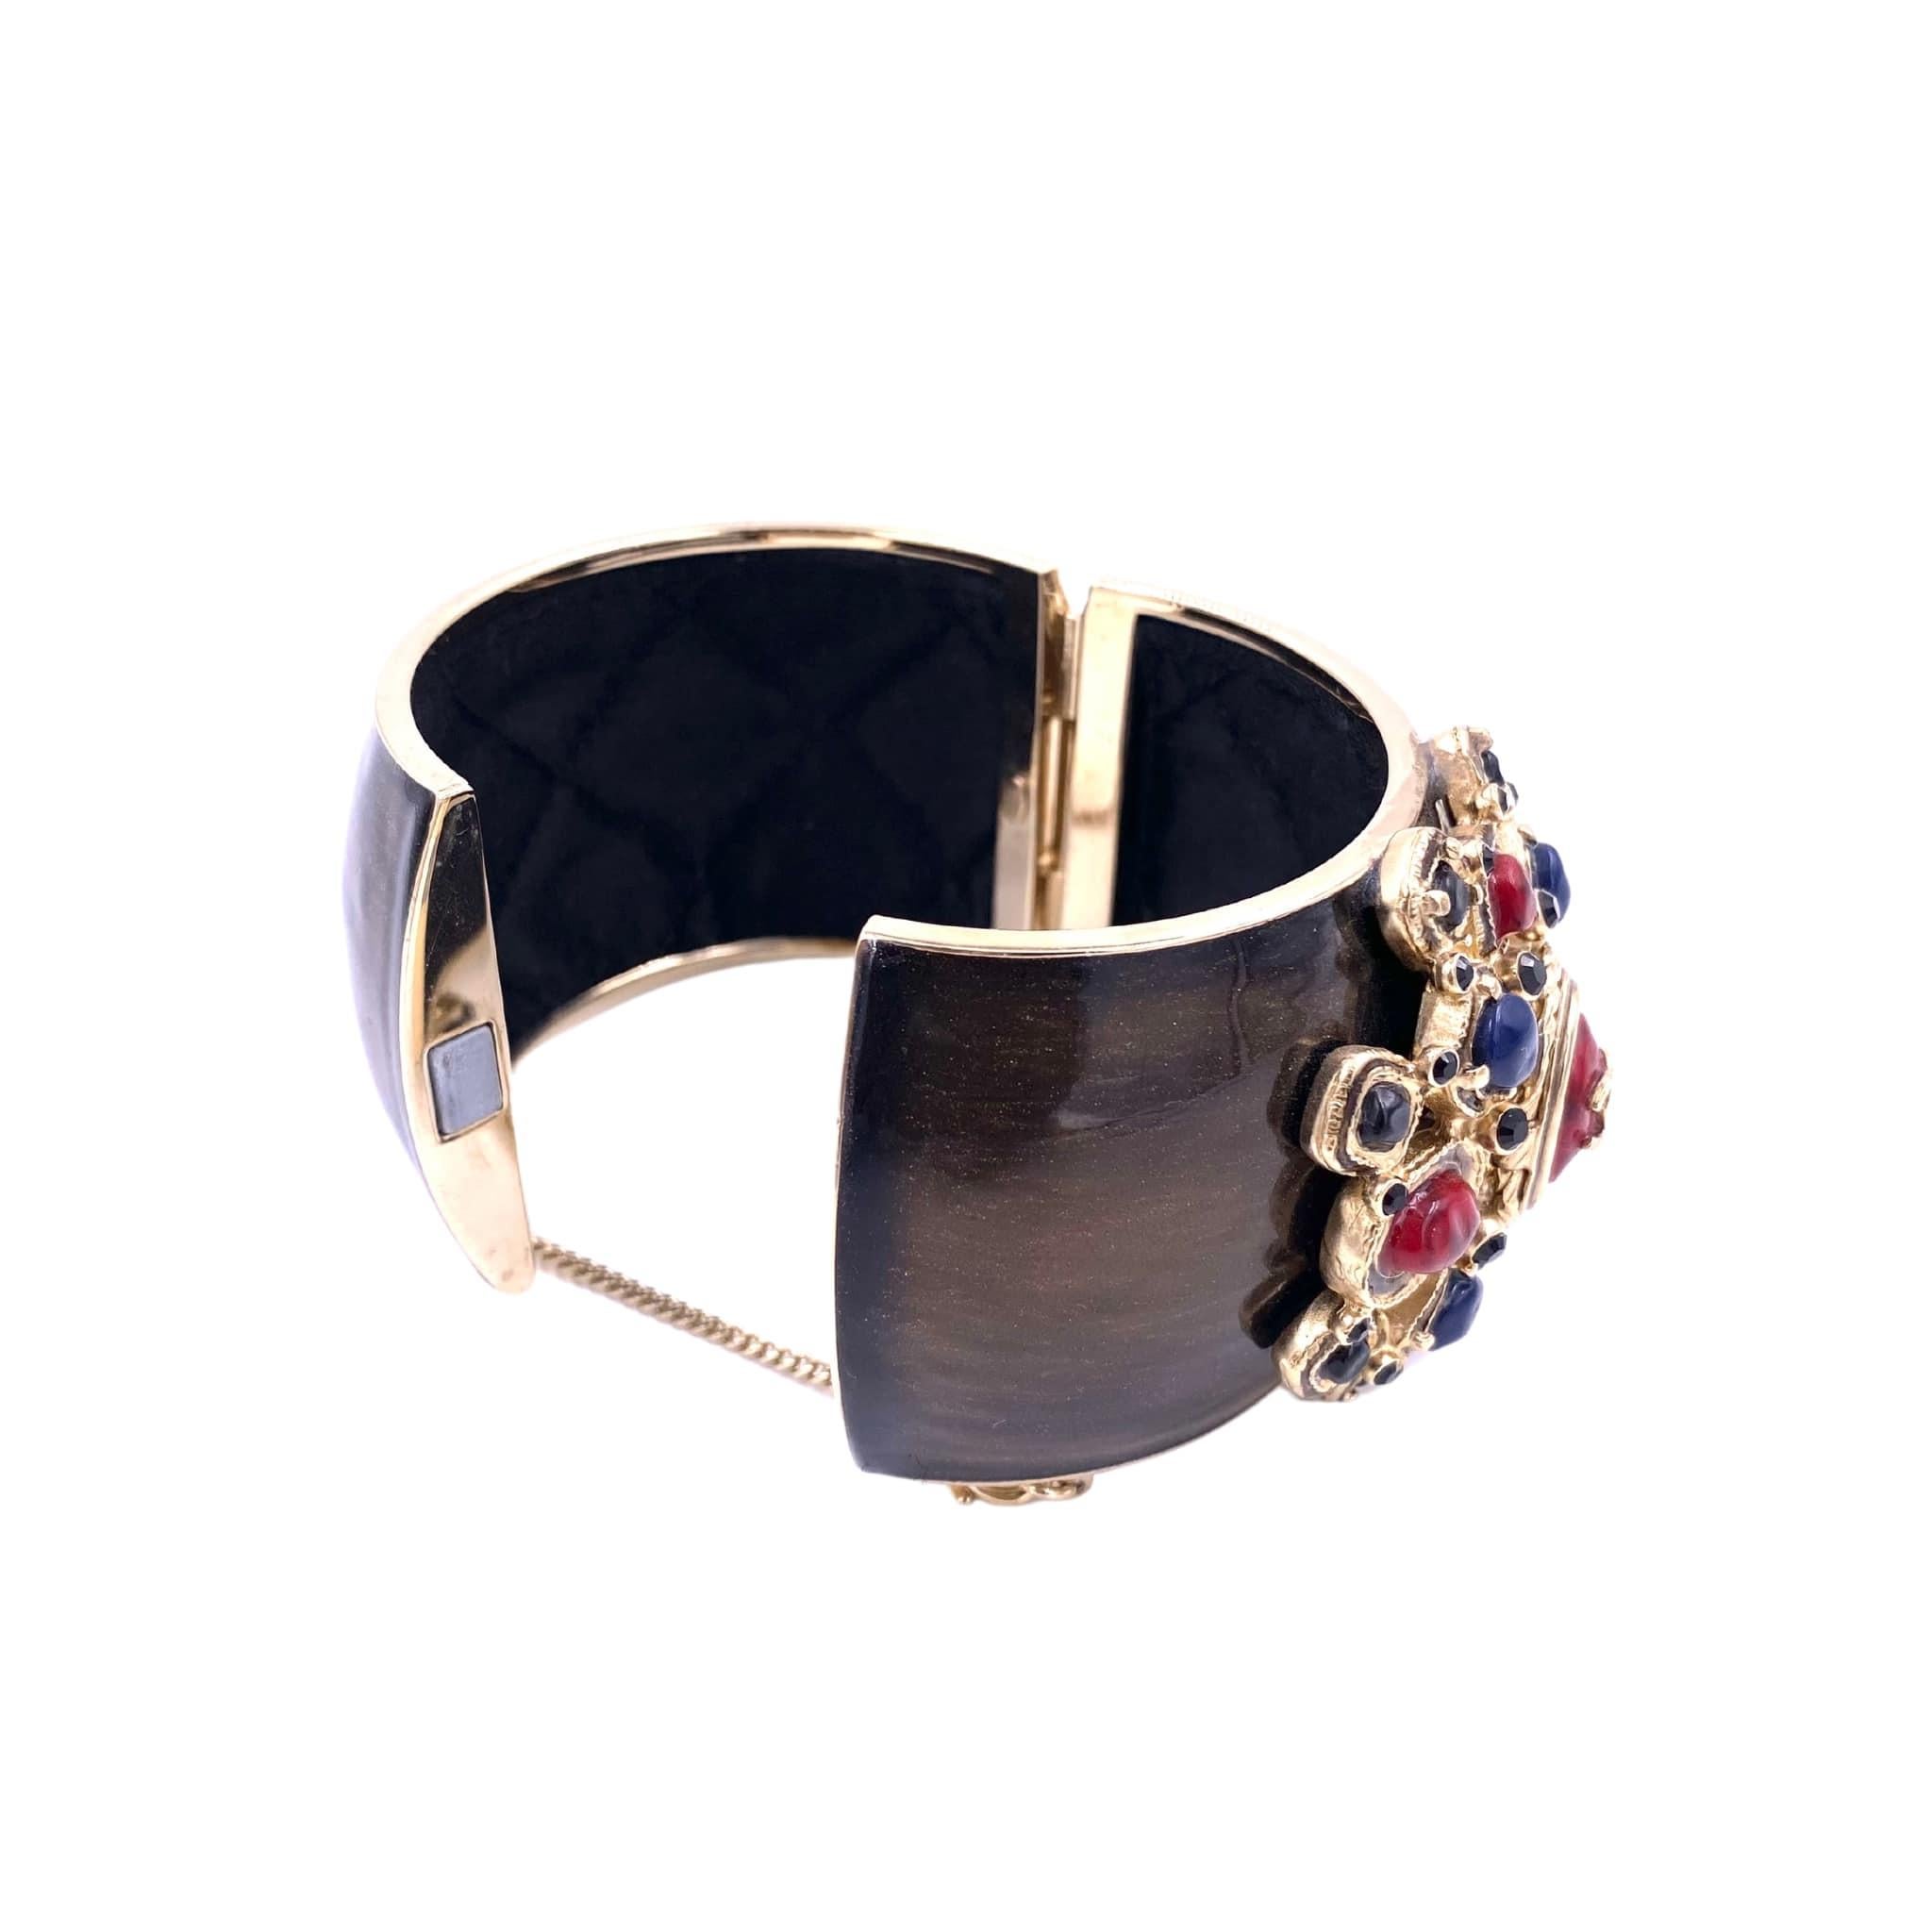 Chanel 2006 Cuff with Maltese Cross In Excellent Condition For Sale In Los Angeles, CA